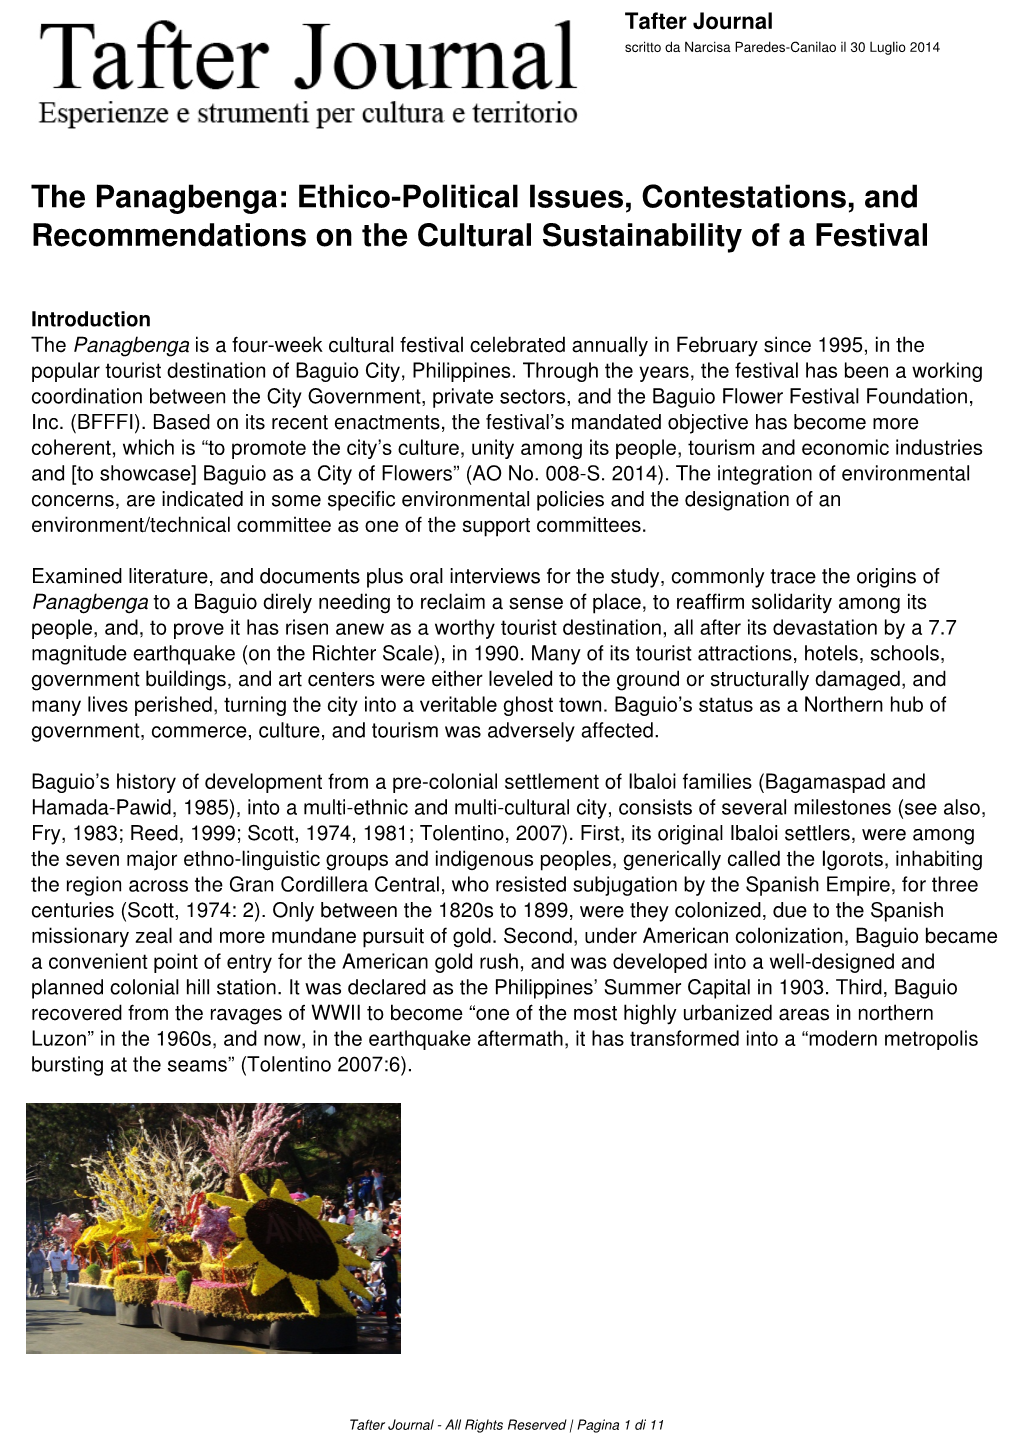 The Panagbenga: Ethico-Political Issues, Contestations, and Recommendations on the Cultural Sustainability of a Festival